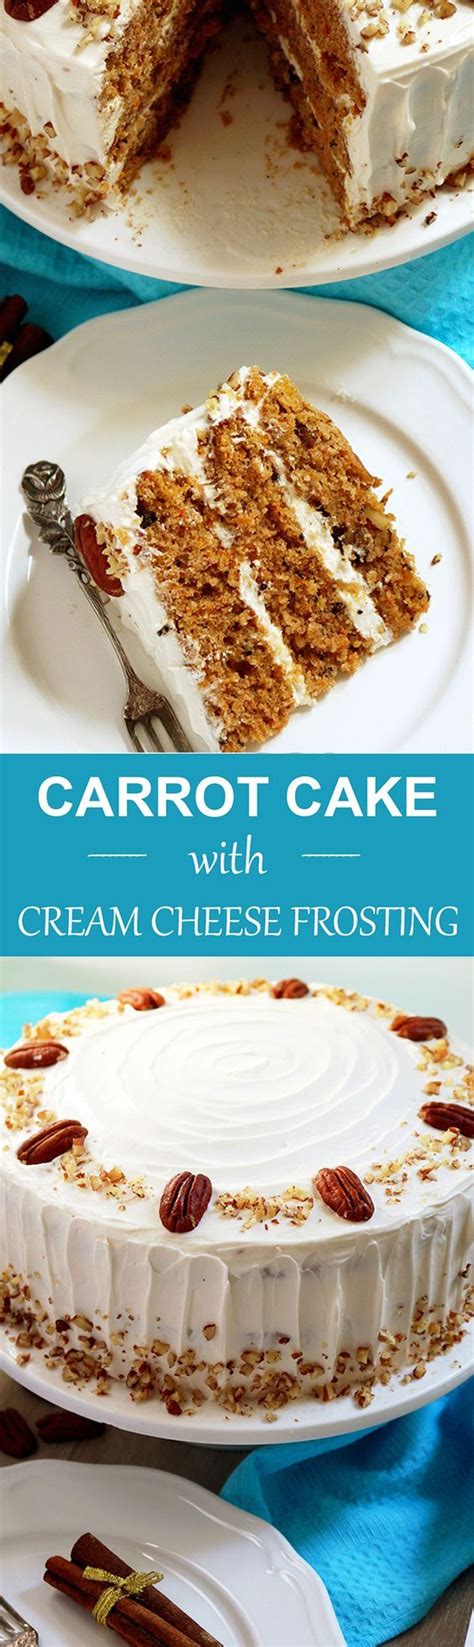 Carrot Cake With Cream Cheese Frosting Recipe Carrot Cake Easter Desserts Recipes Desserts